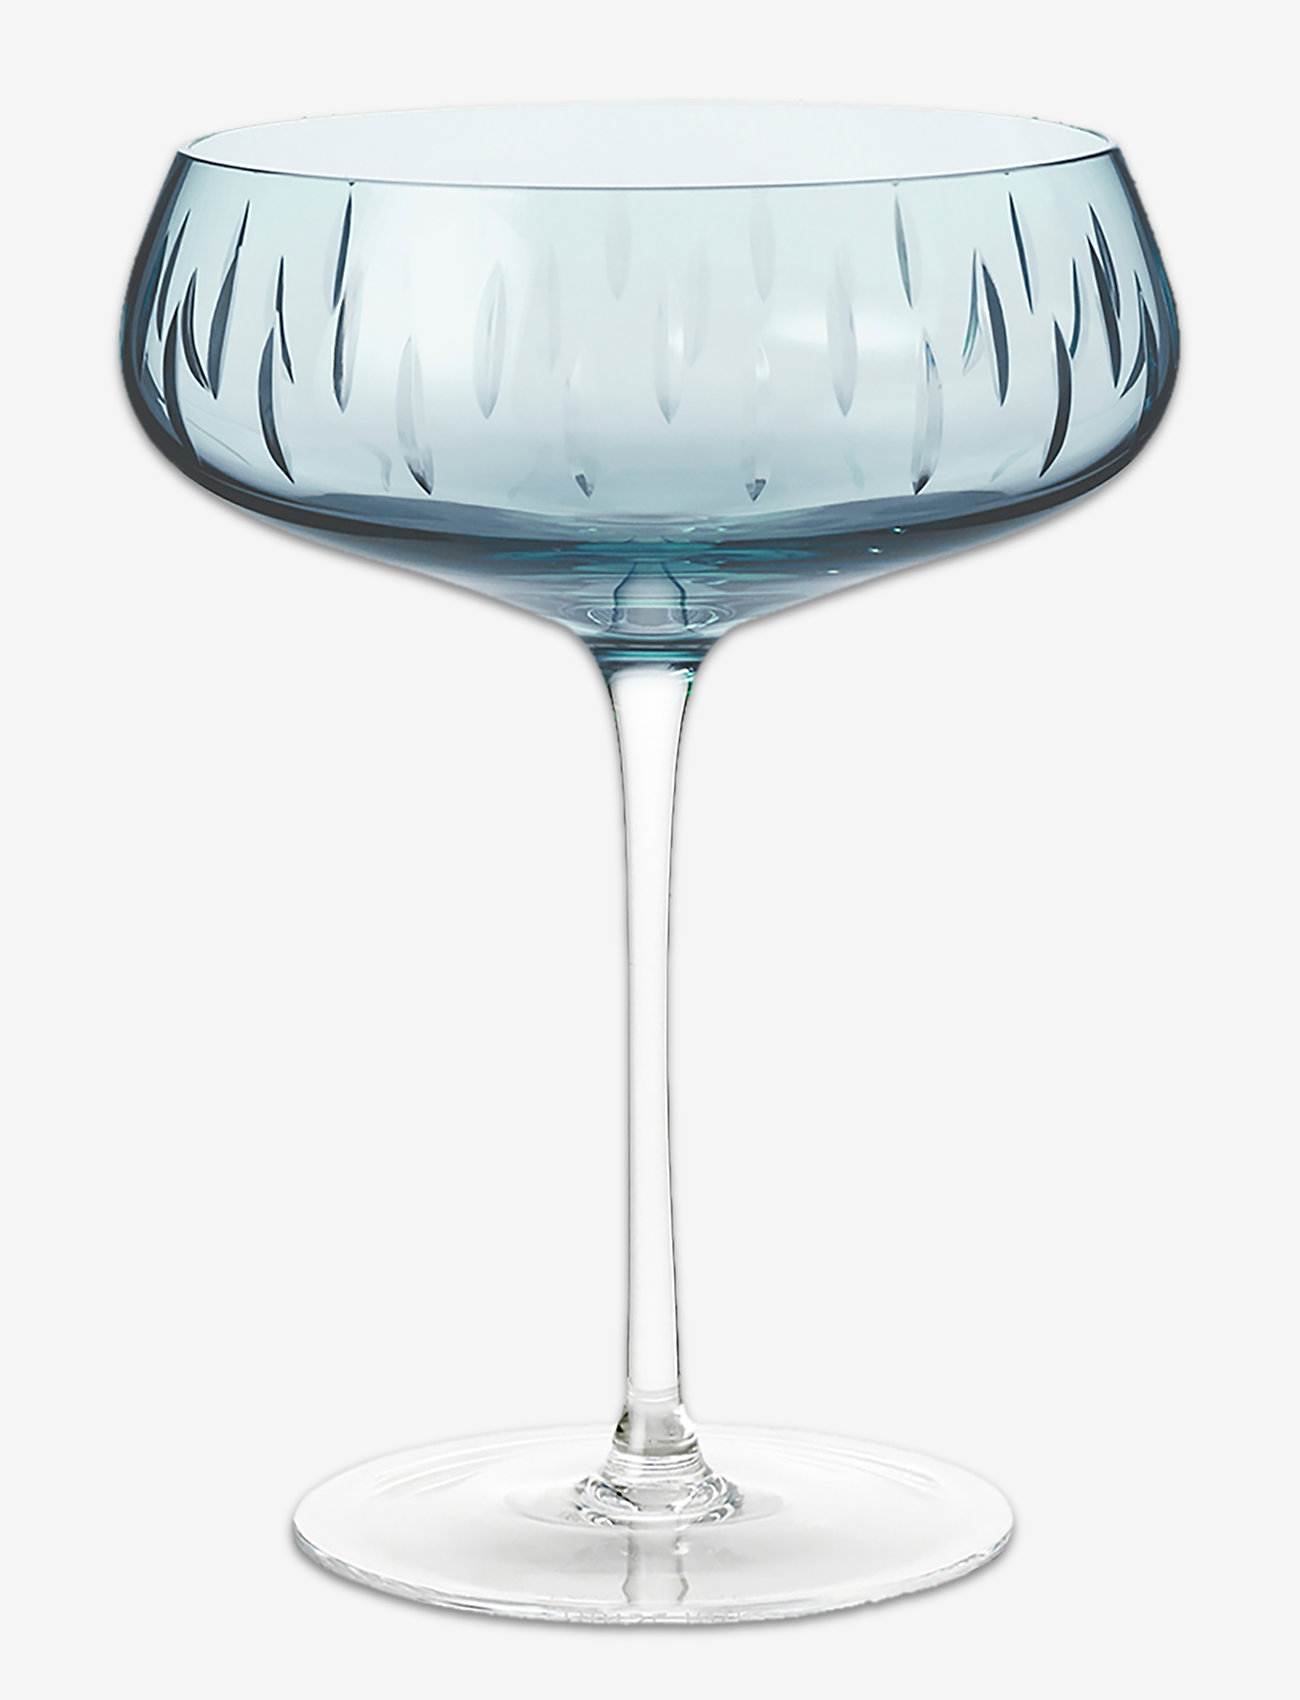 LOUISE ROE - Champagne Coupe - champagneglas - blue - 0